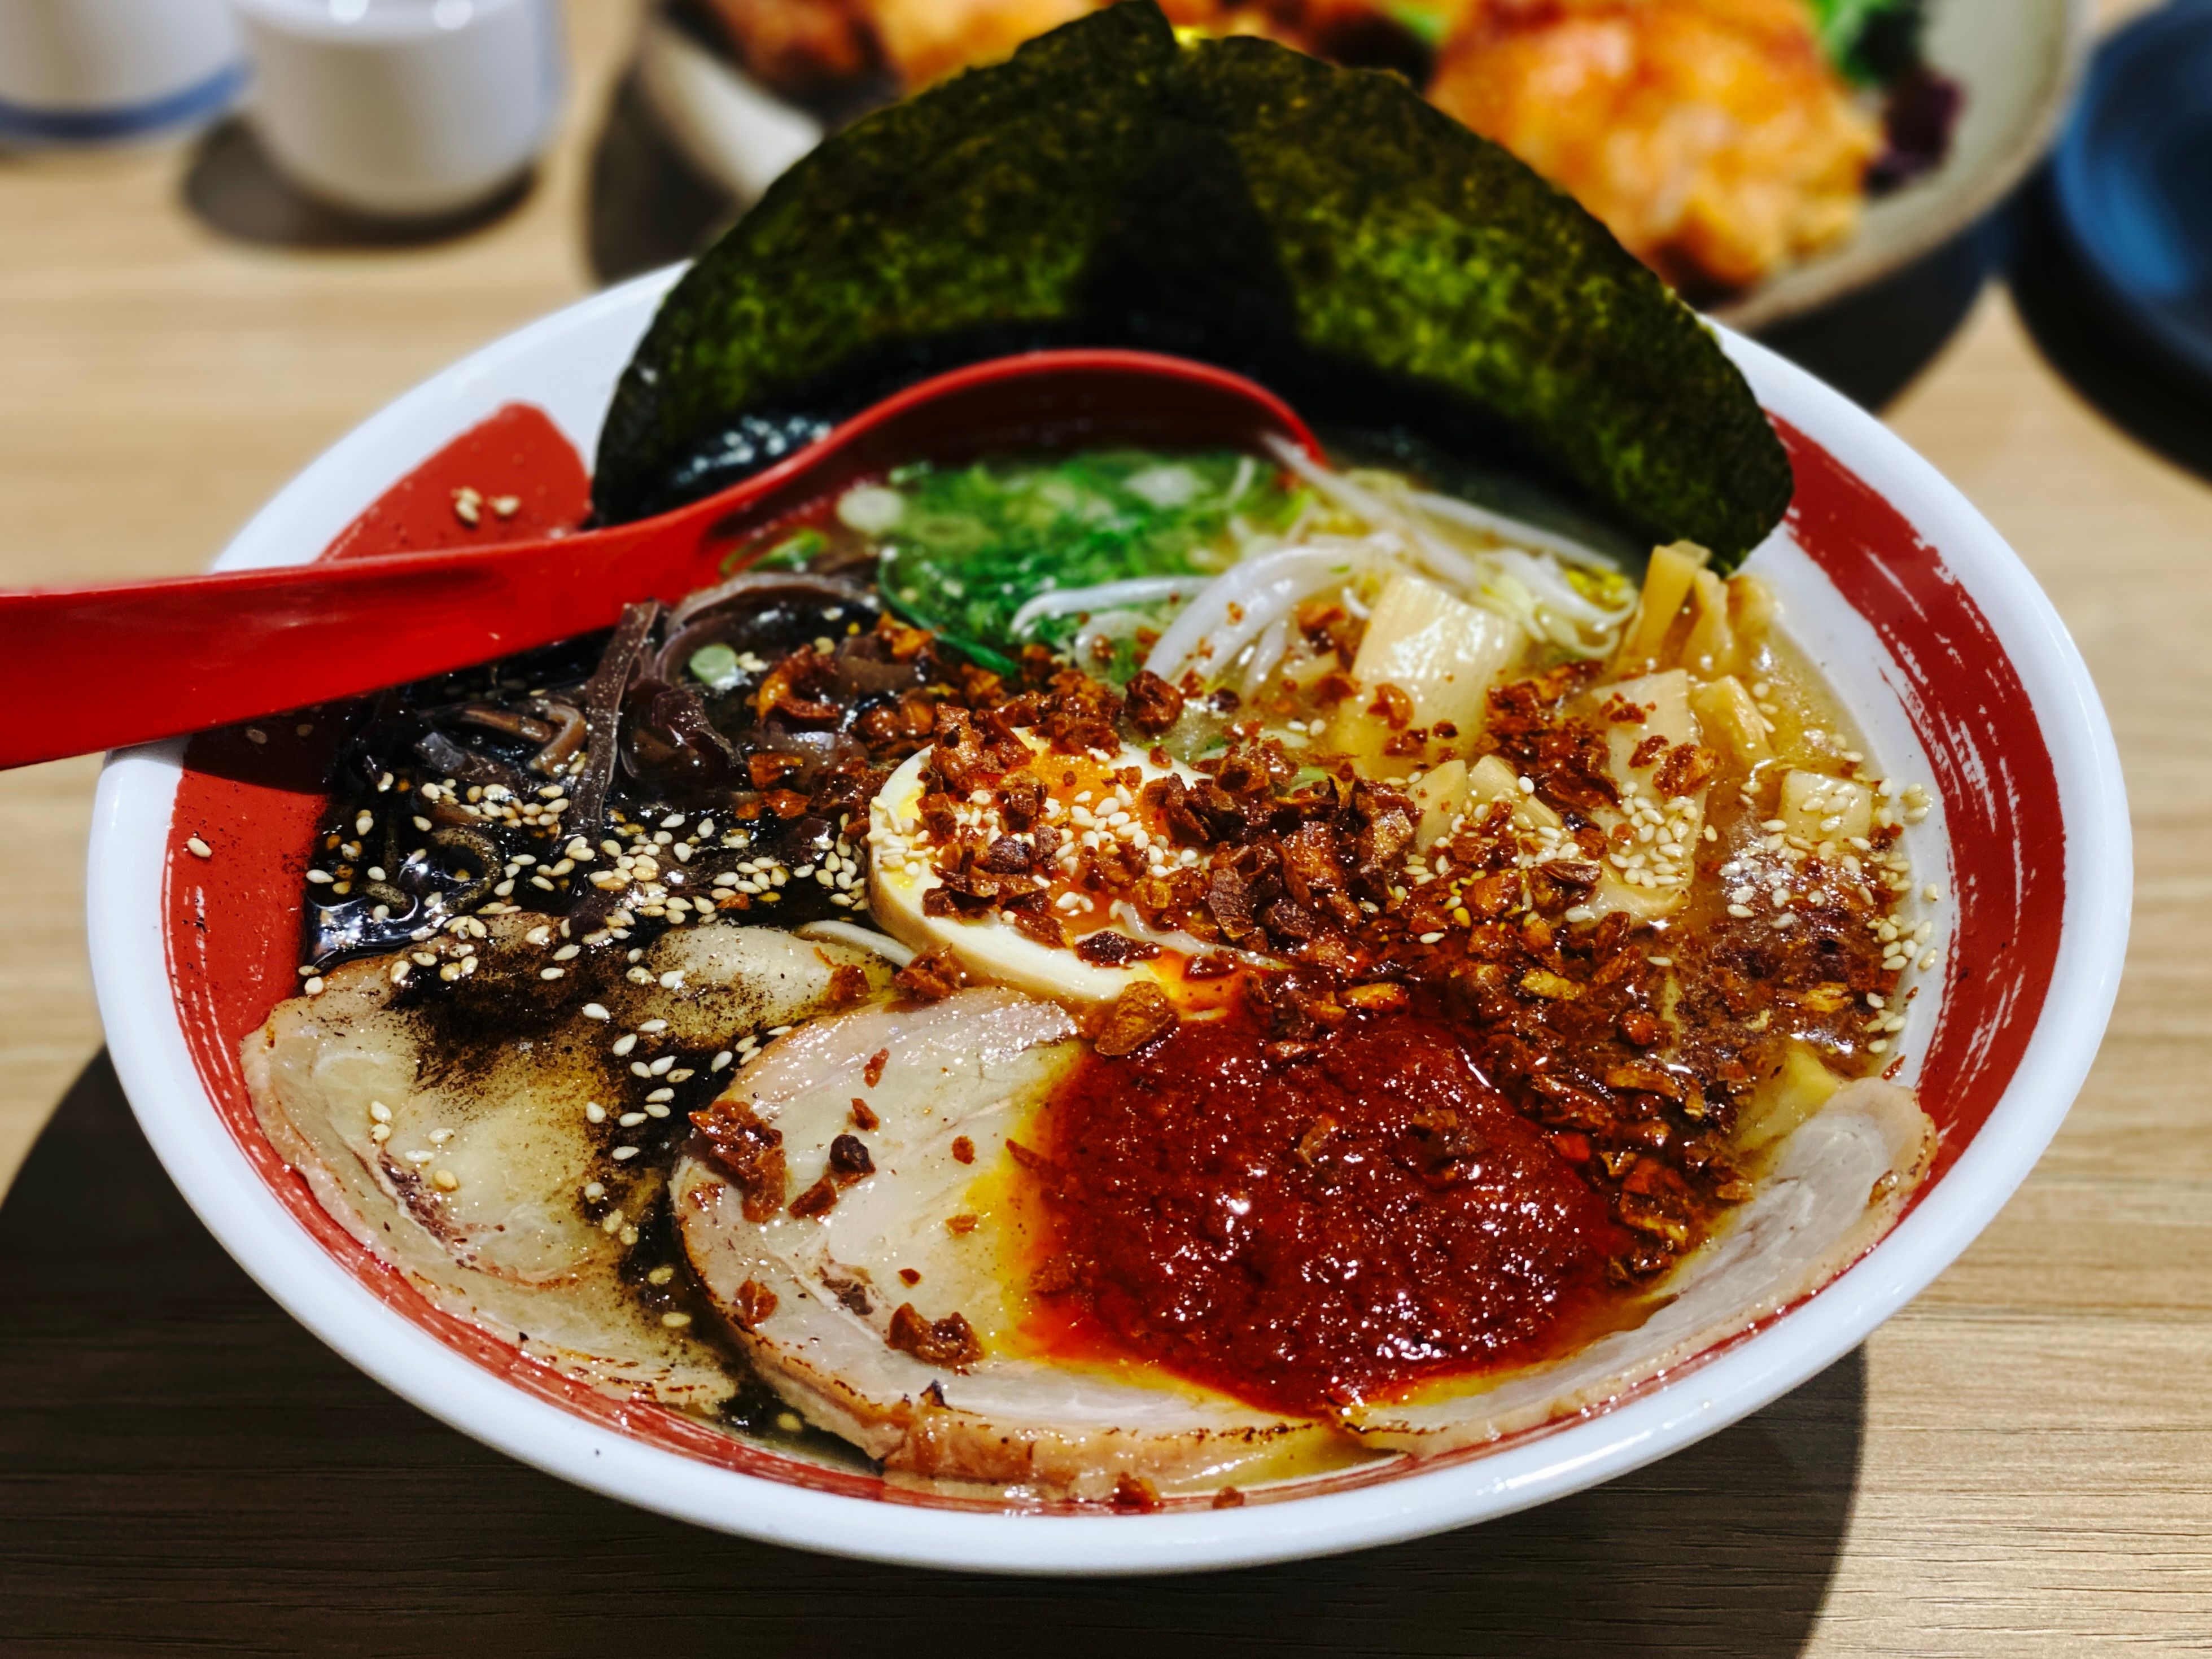 A photo of a bowl of ramen. It has slices of pork with chilli sauce on it, shallots, some sort of thinly-sliced mushroom thing, and two pieces of nori at the back, plus the standard ramen noodles.